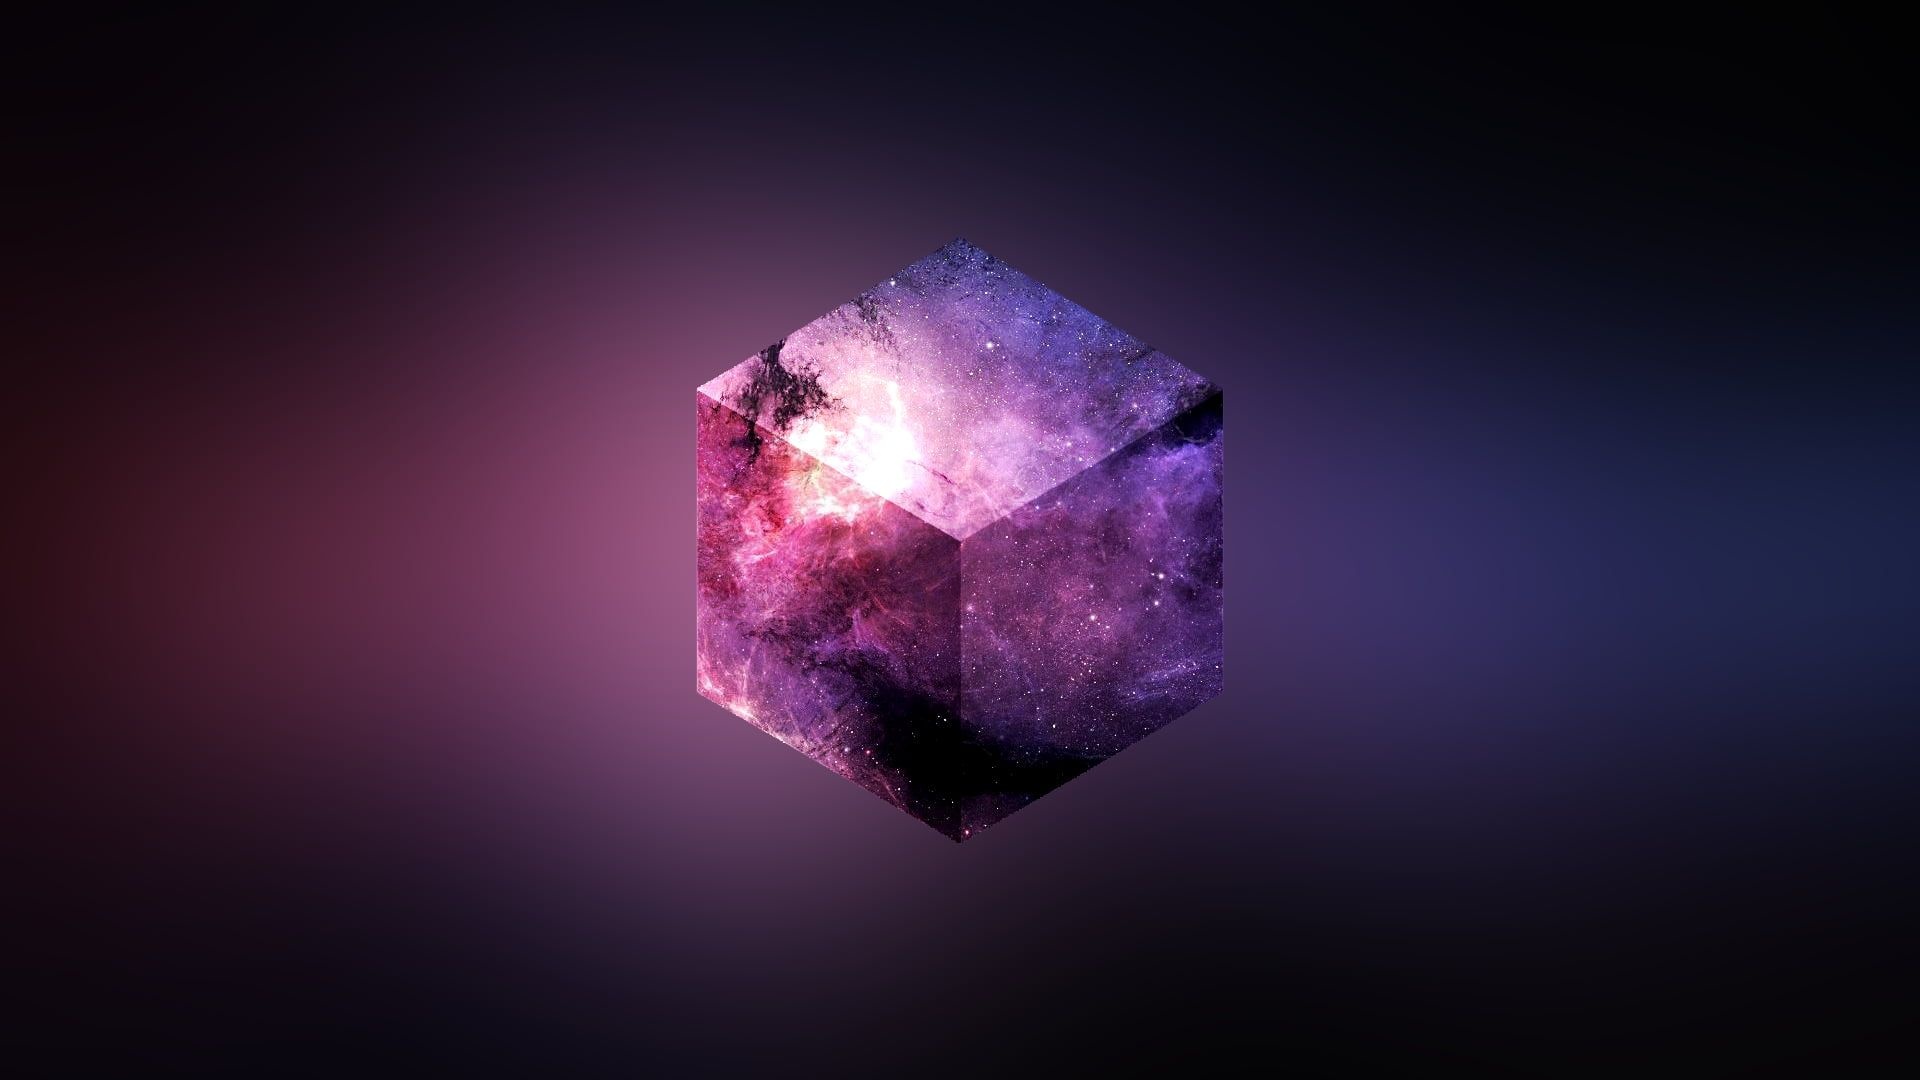 Purple and Black Cube, Mysterious vibes, Dark aesthetic, Contrasting colors, Enigmatic puzzle, 1920x1080 Full HD Desktop